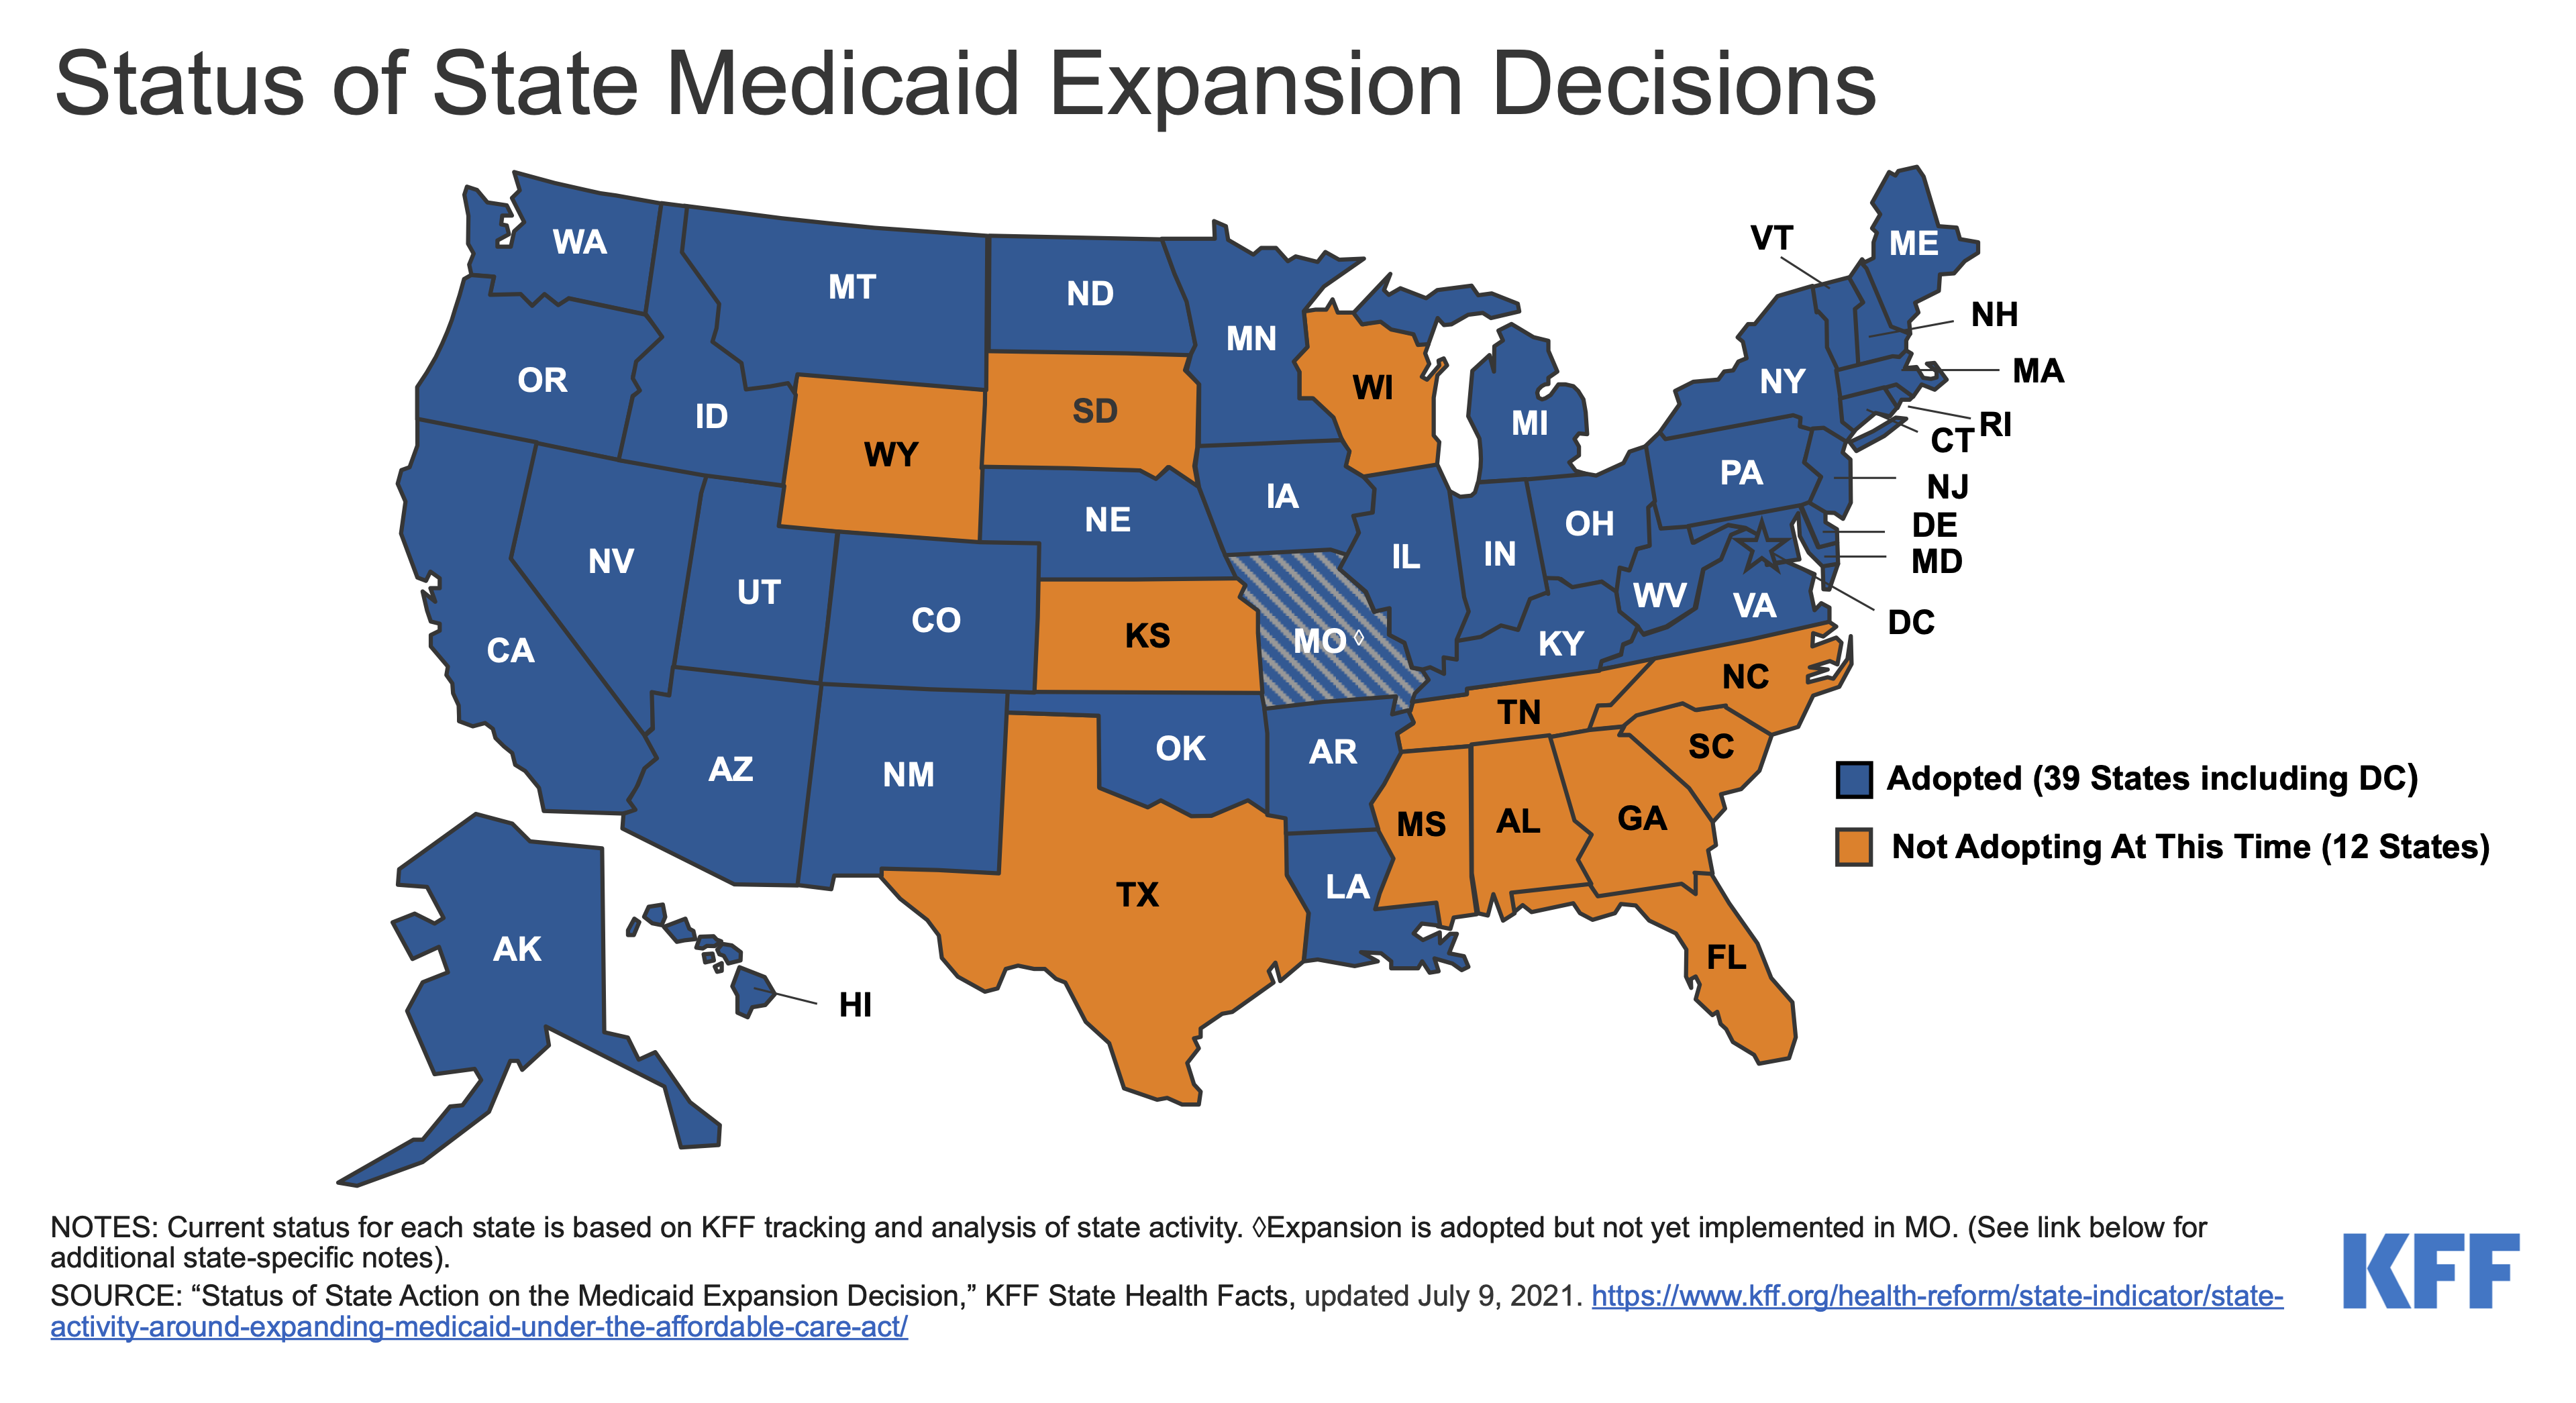 Status of State Action on the Medicaid Expansion Decision